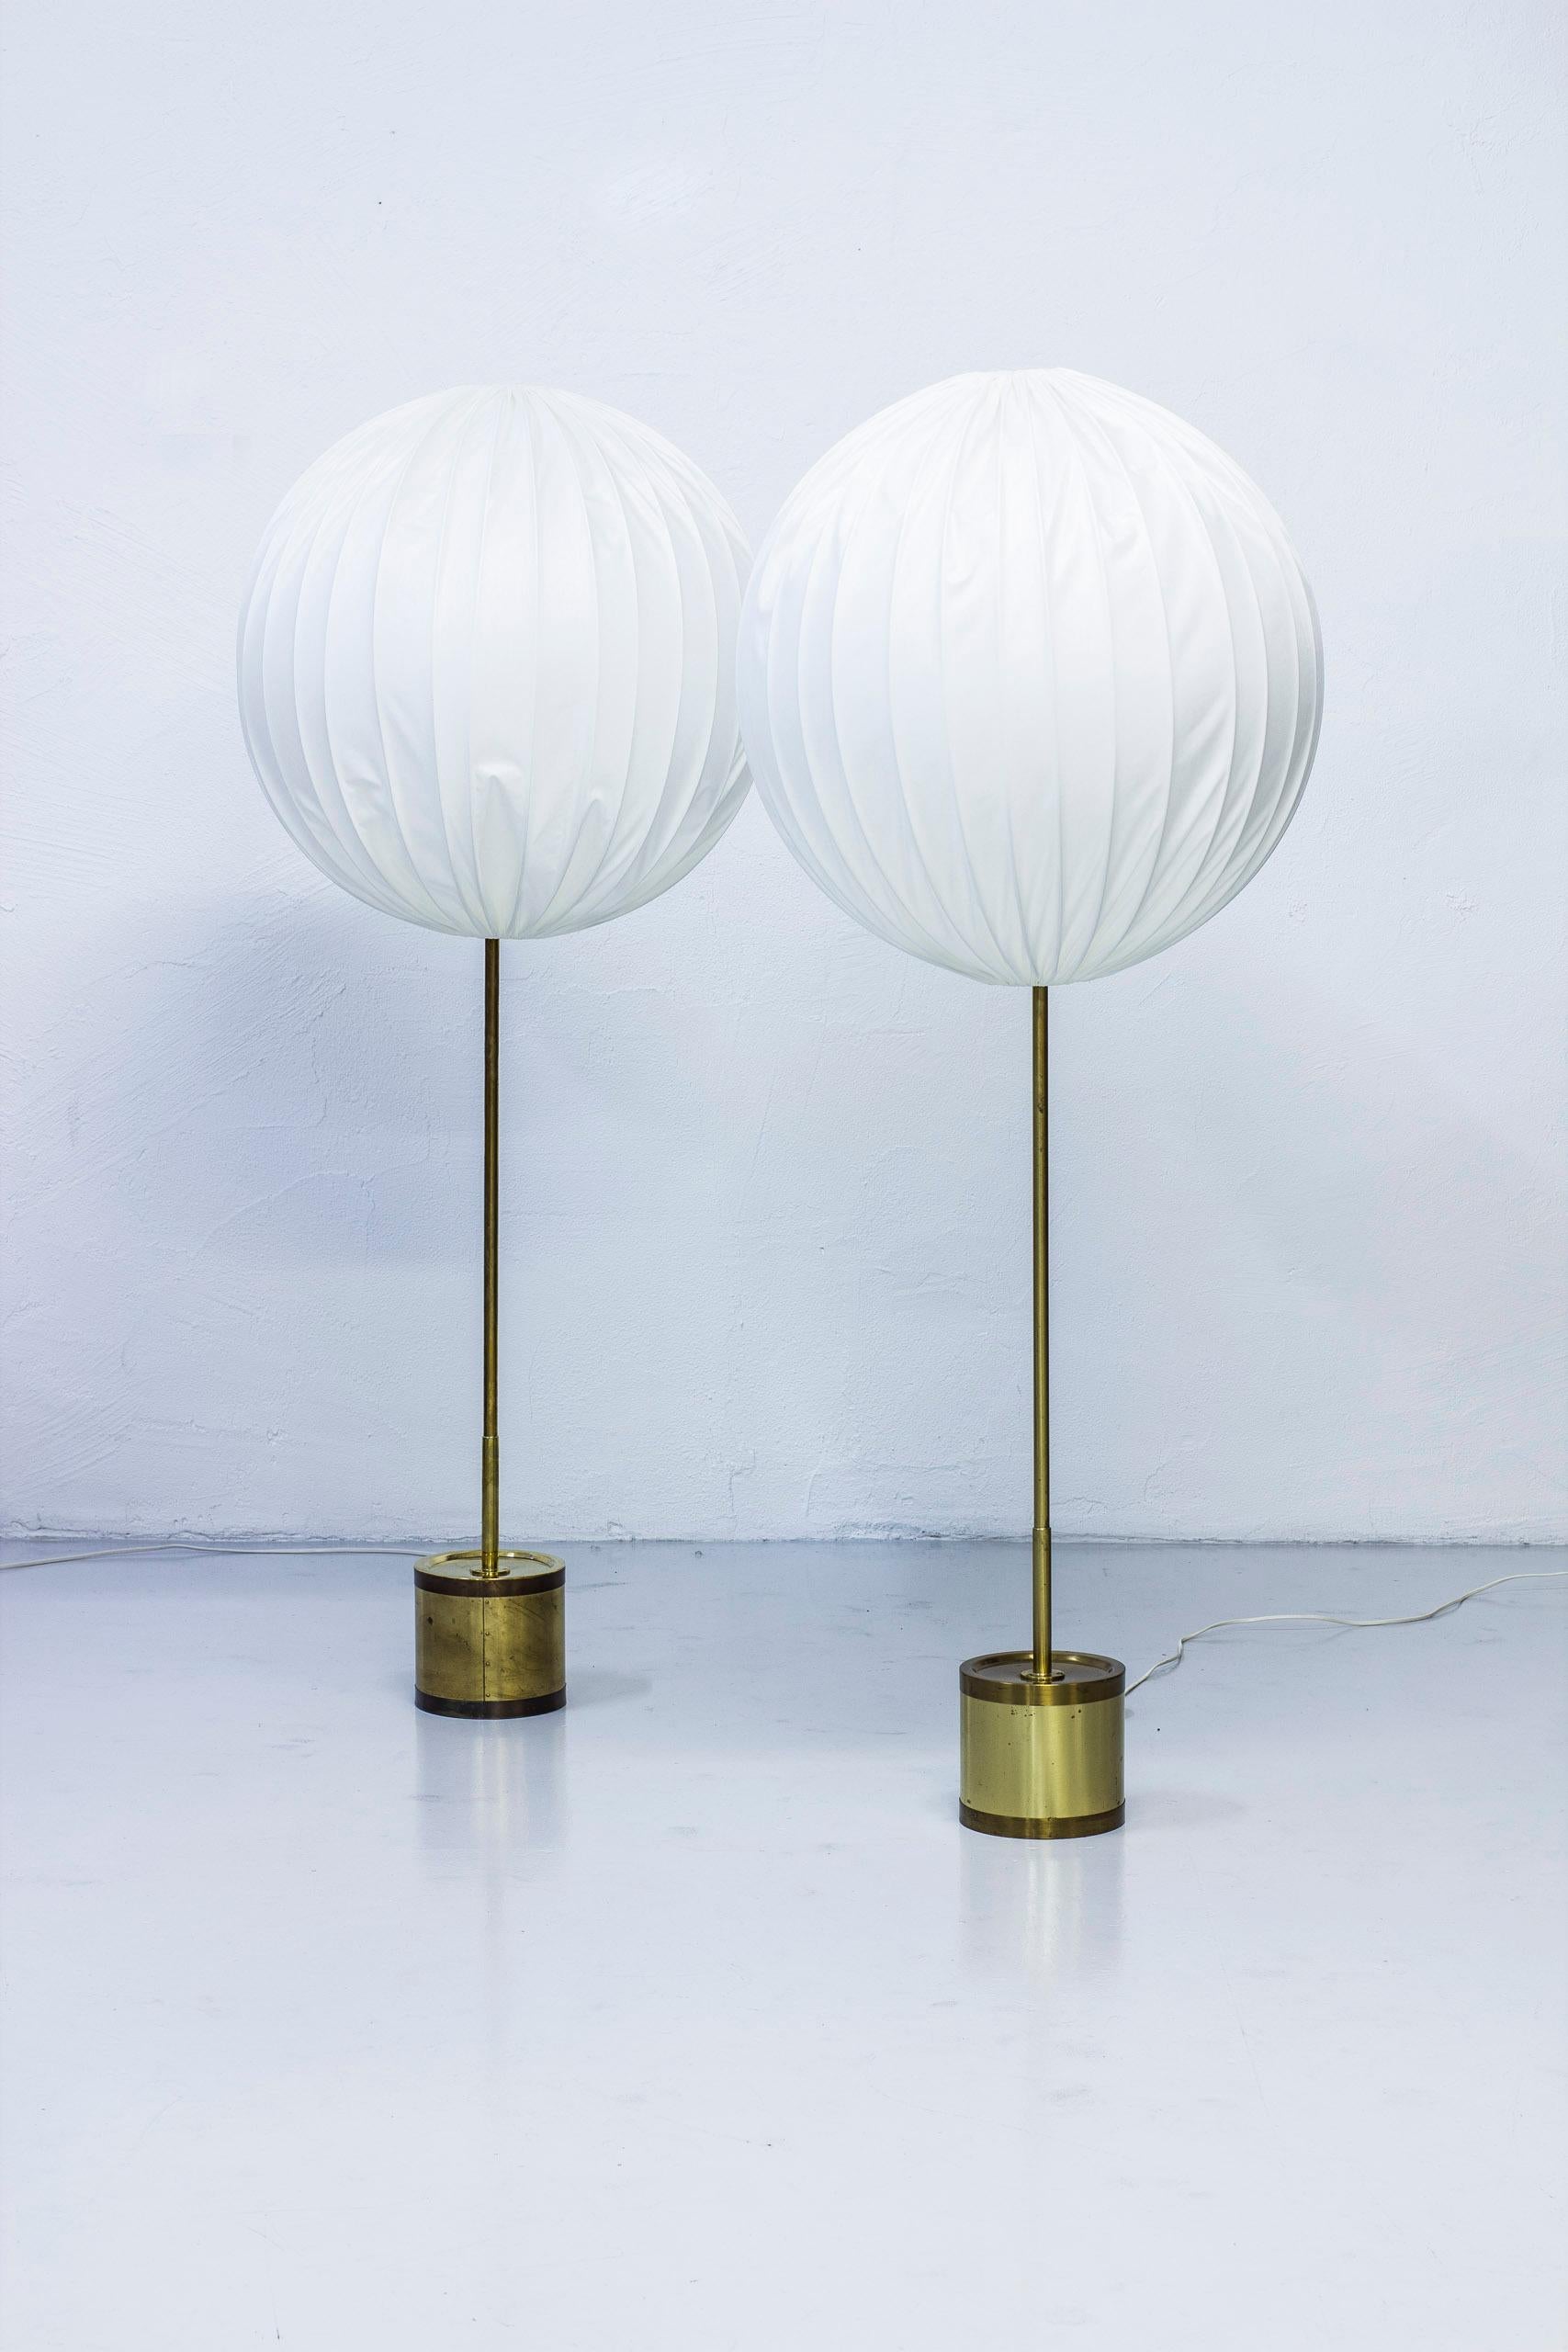 Floor lamp model G123/600 designed by Hans Agne Jakobsson. Produced by his own company in Markaryd, Sweden during the 1960s. Made from solid polished brass with original large round shades. Reupholstered in off white chintz fabric. Light switch on